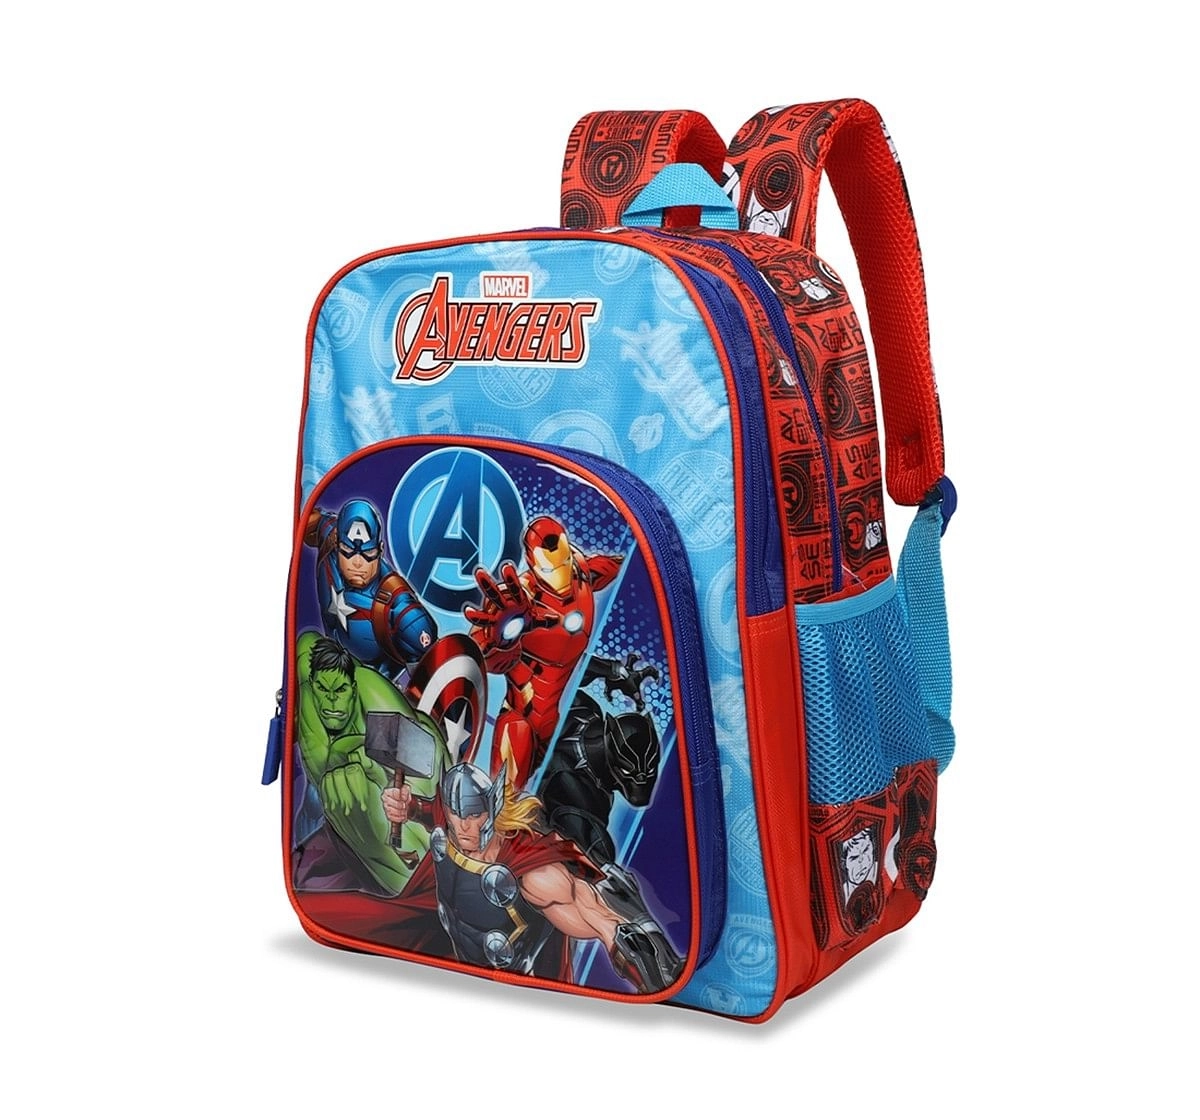 Marvel Avengers Super Heroes Red & Blue School Bag 46 Cm Bags for age 10Y+ 